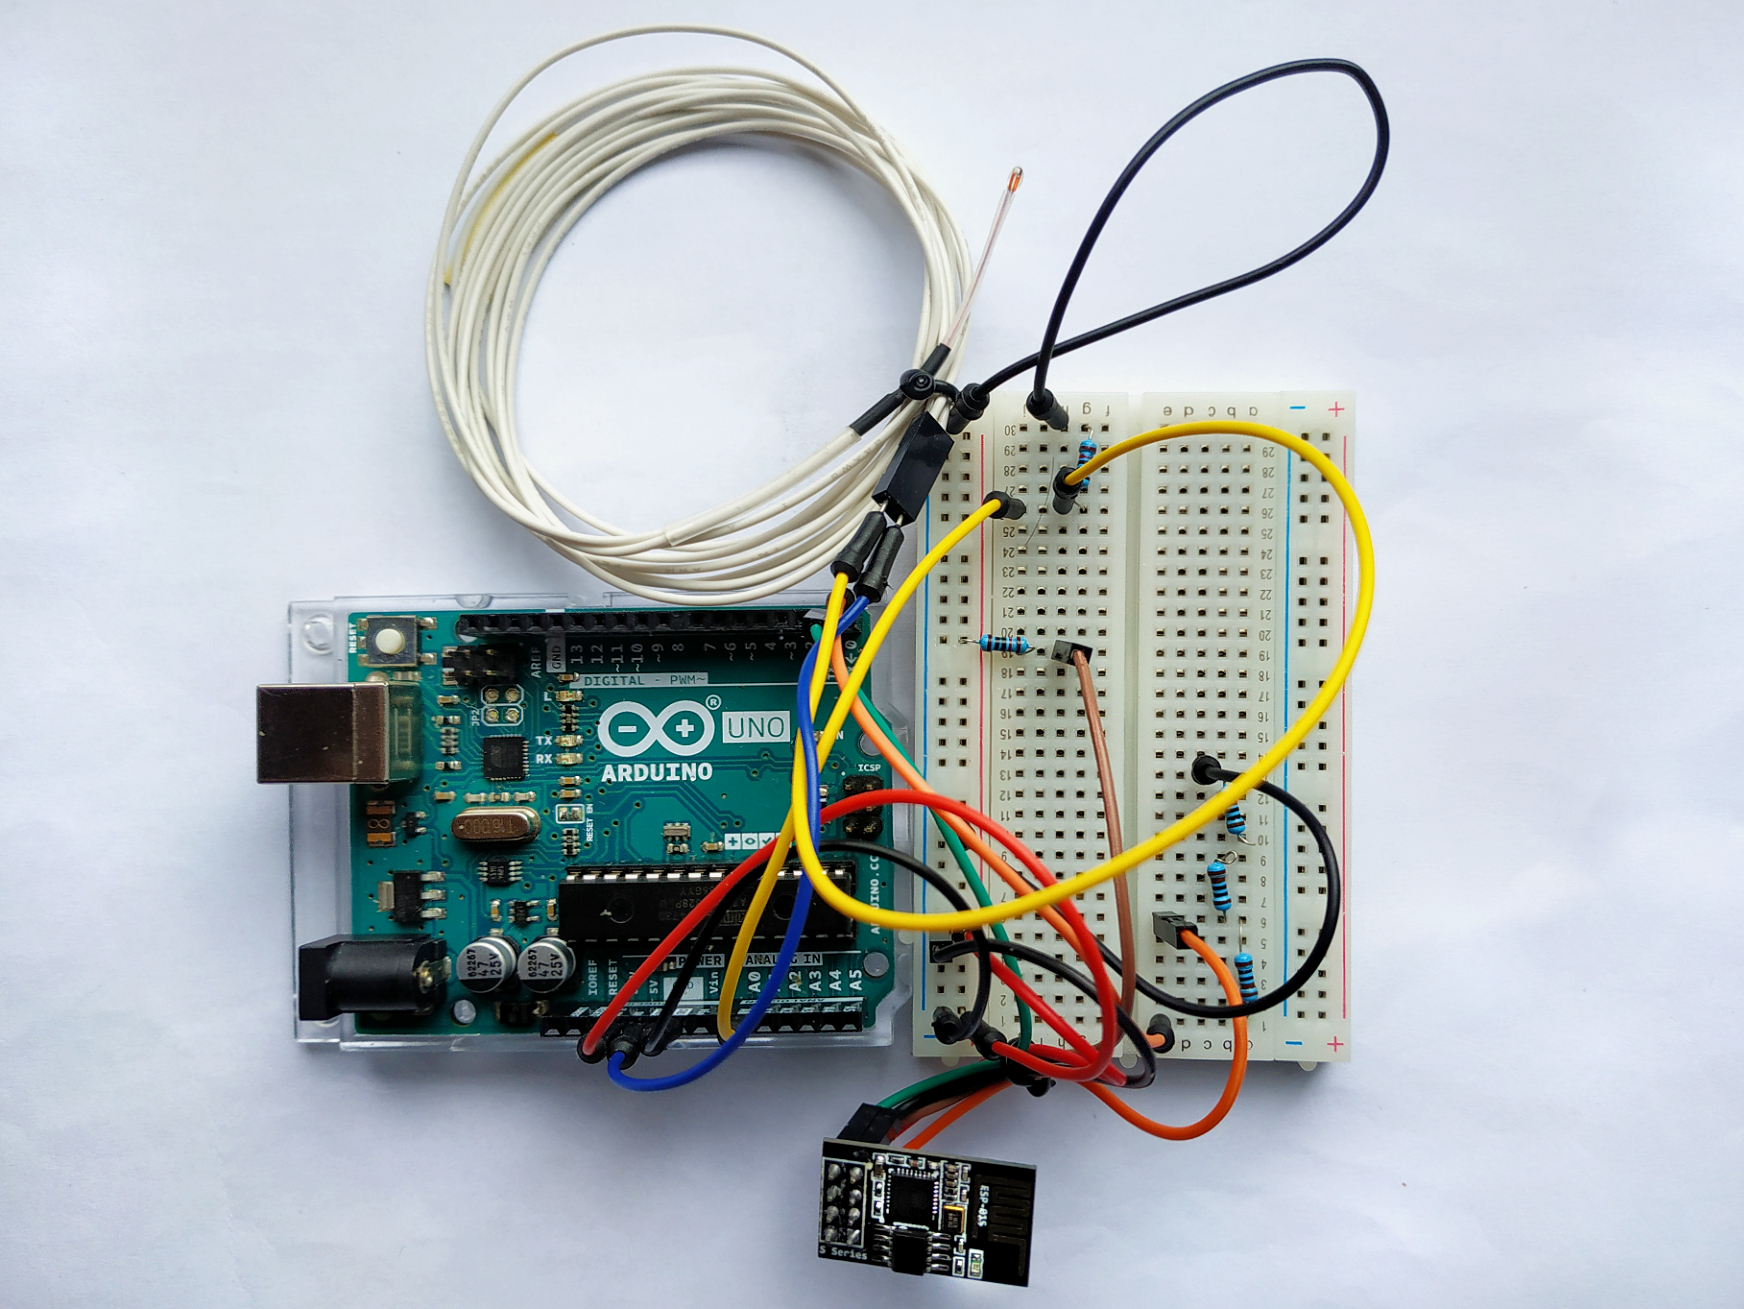 How to Send Emails With a WiFi Connected Arduino